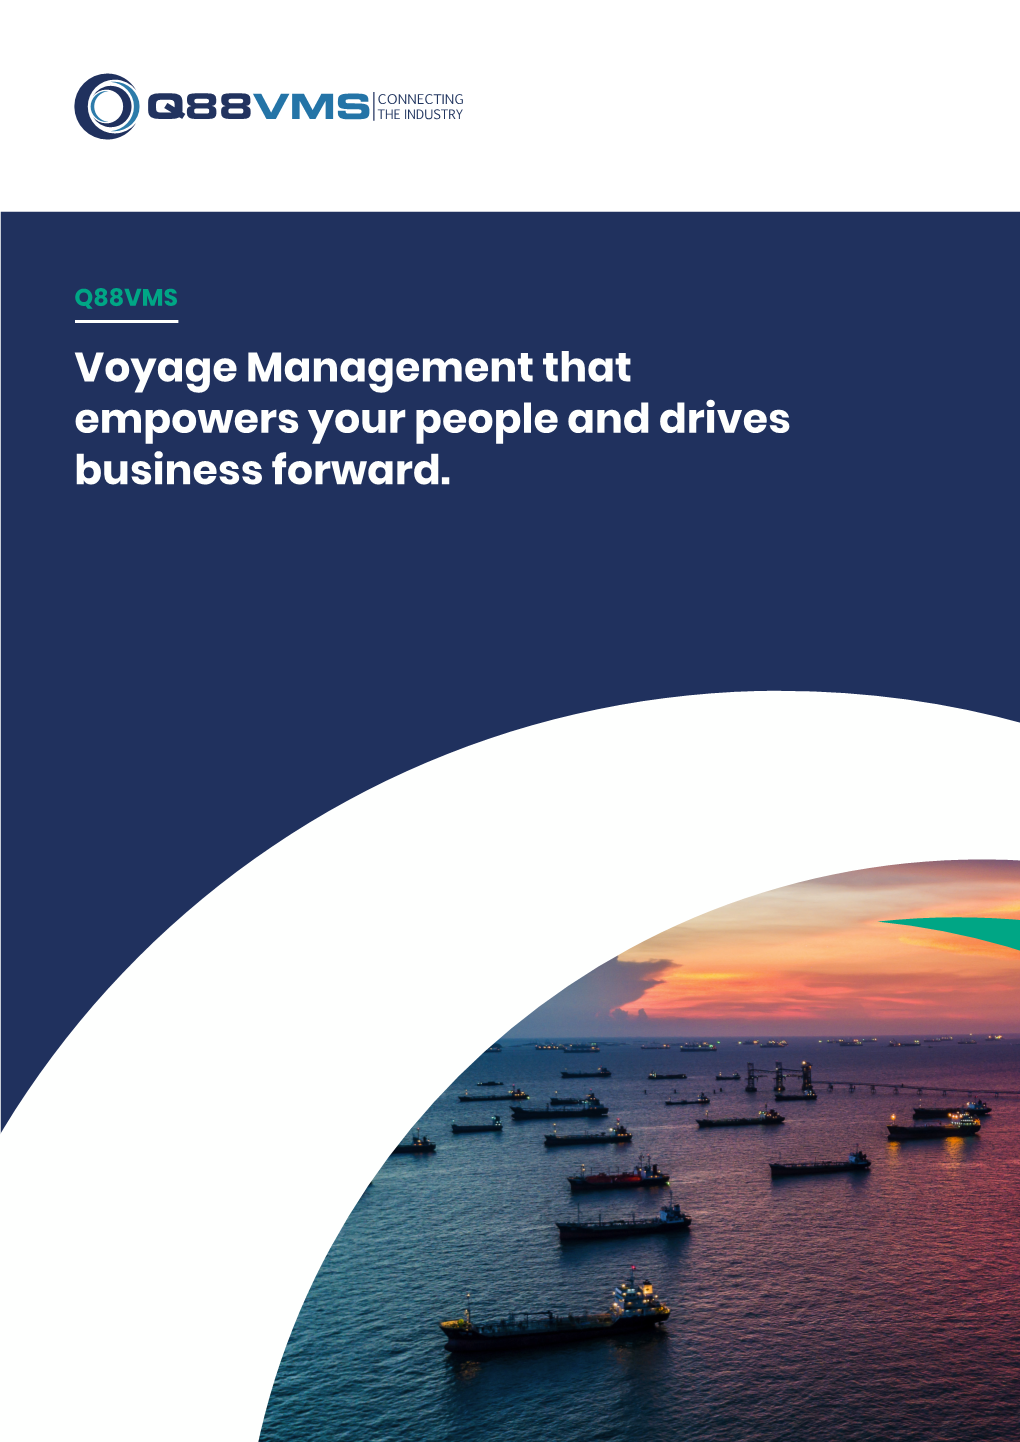 Voyage Management That Empowers Your People and Drives Business Forward